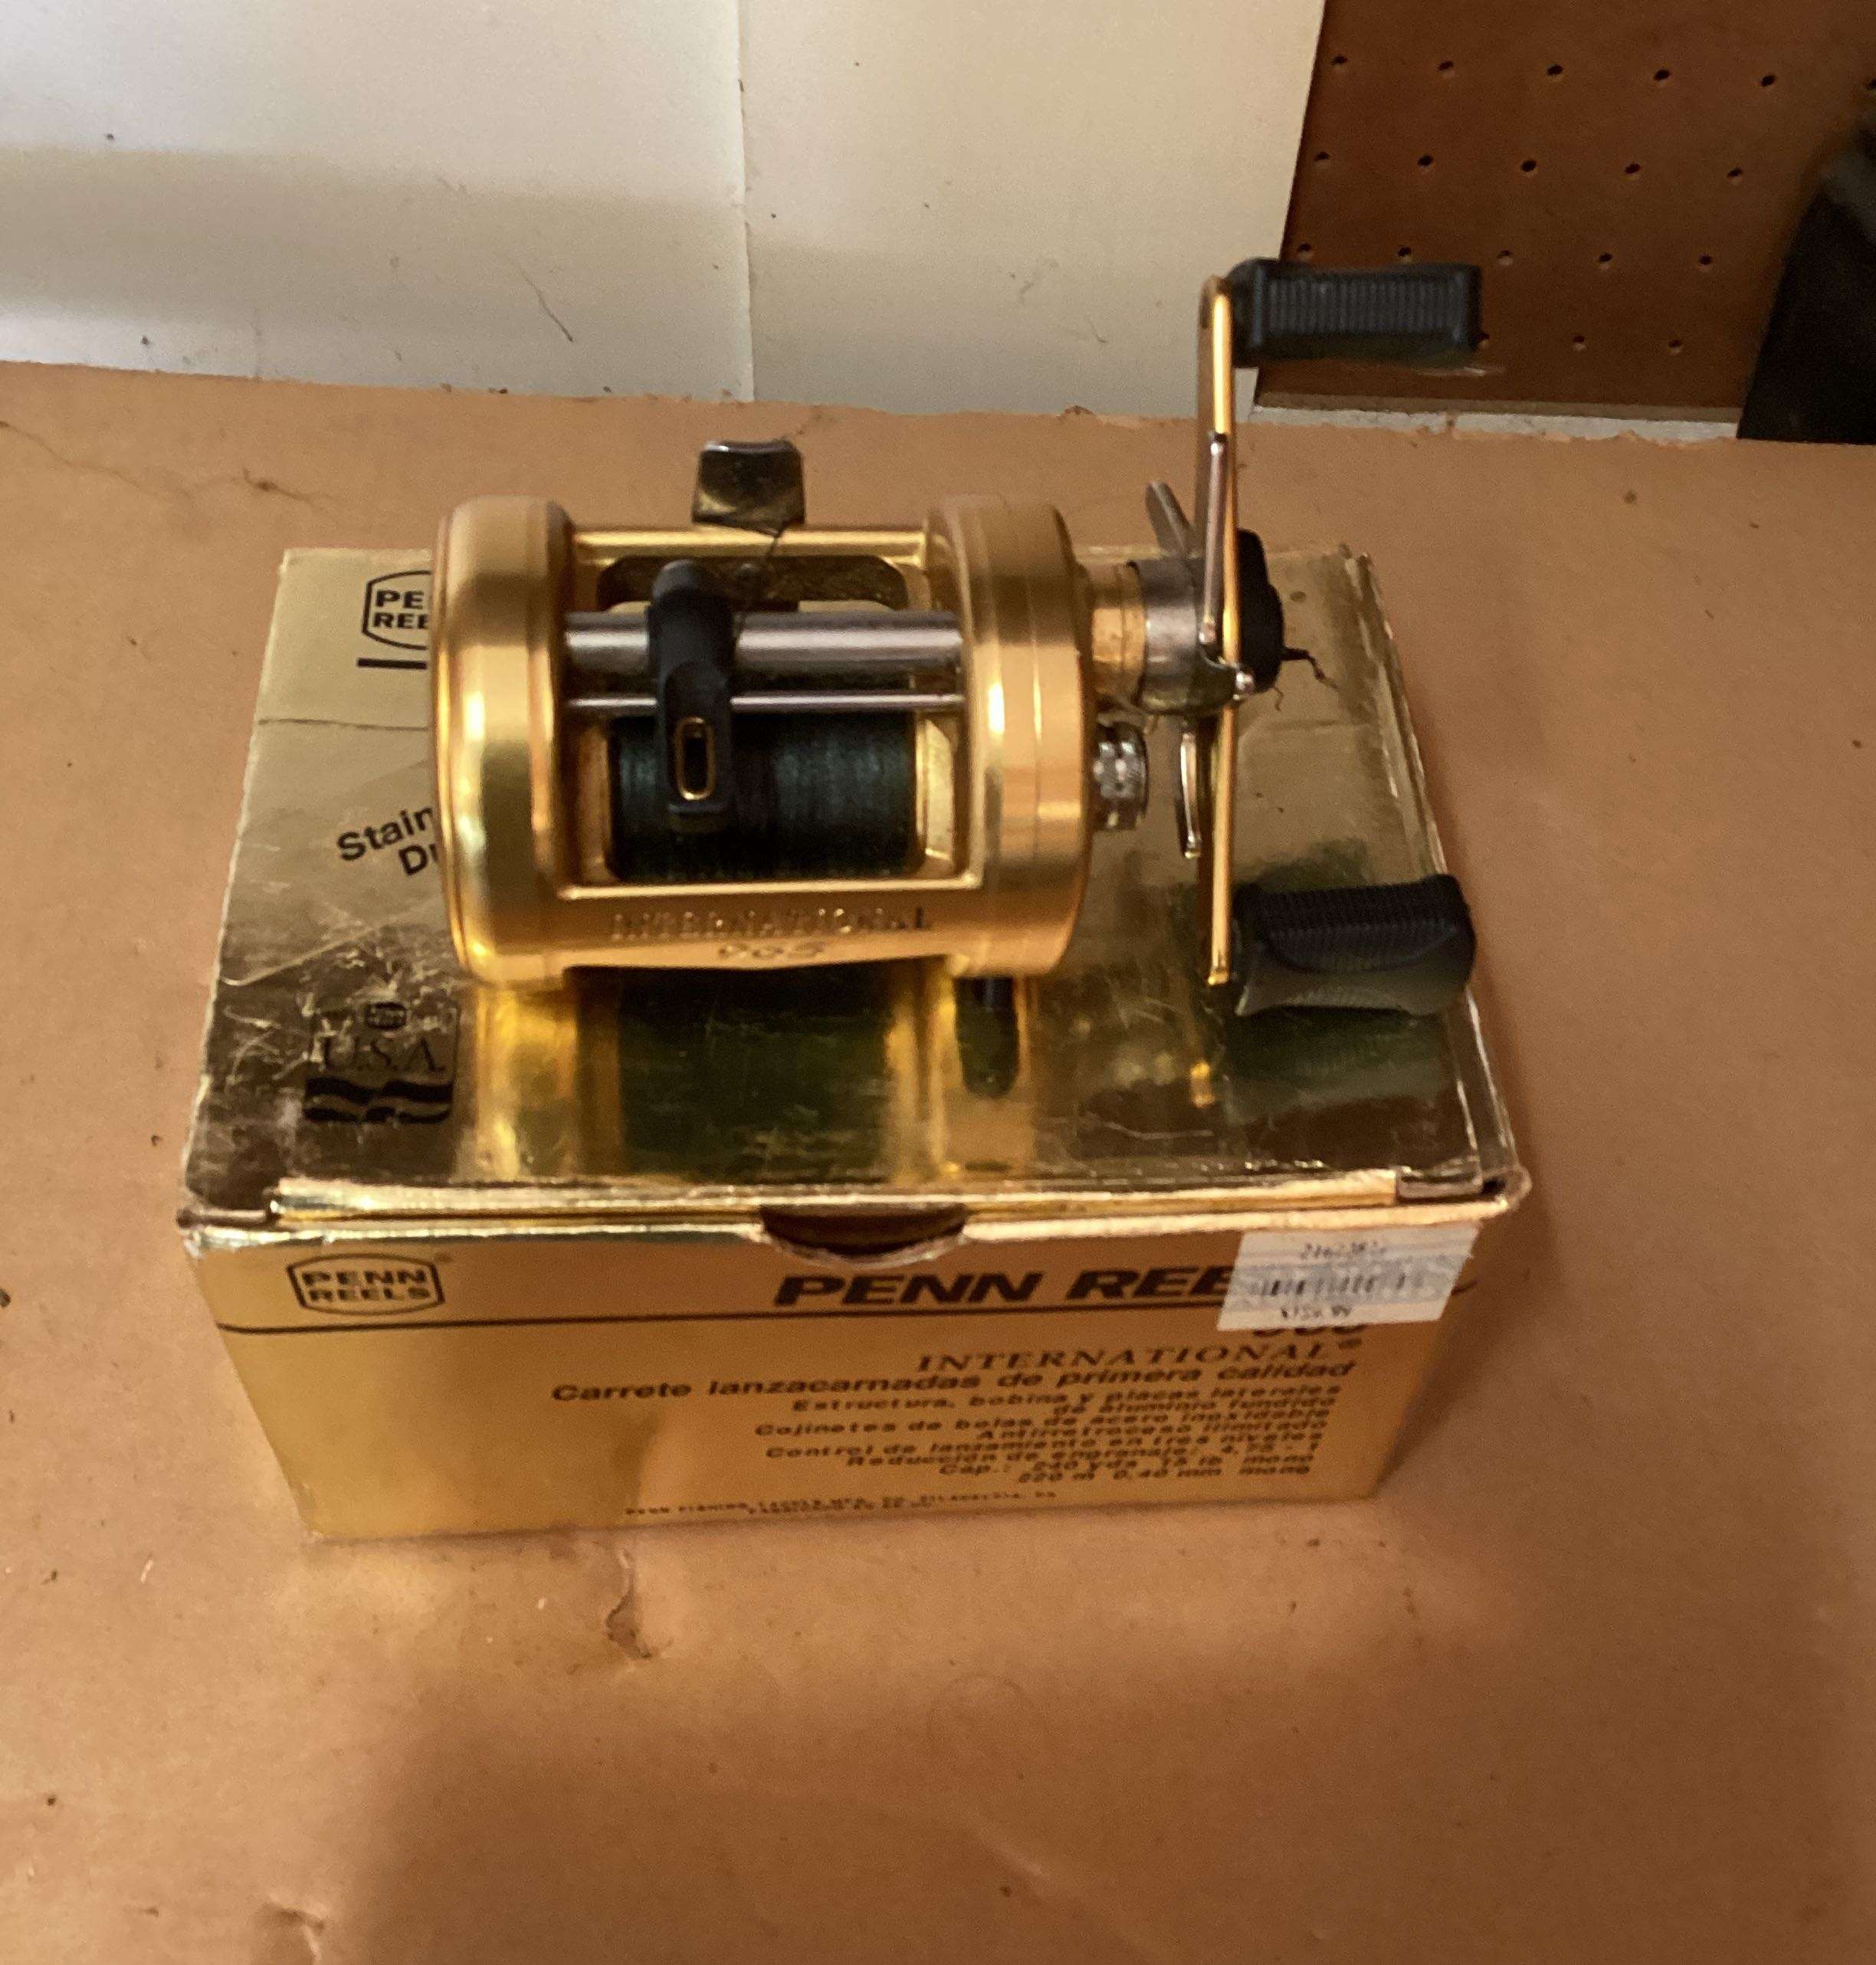 Sold at Auction: PENN REELS